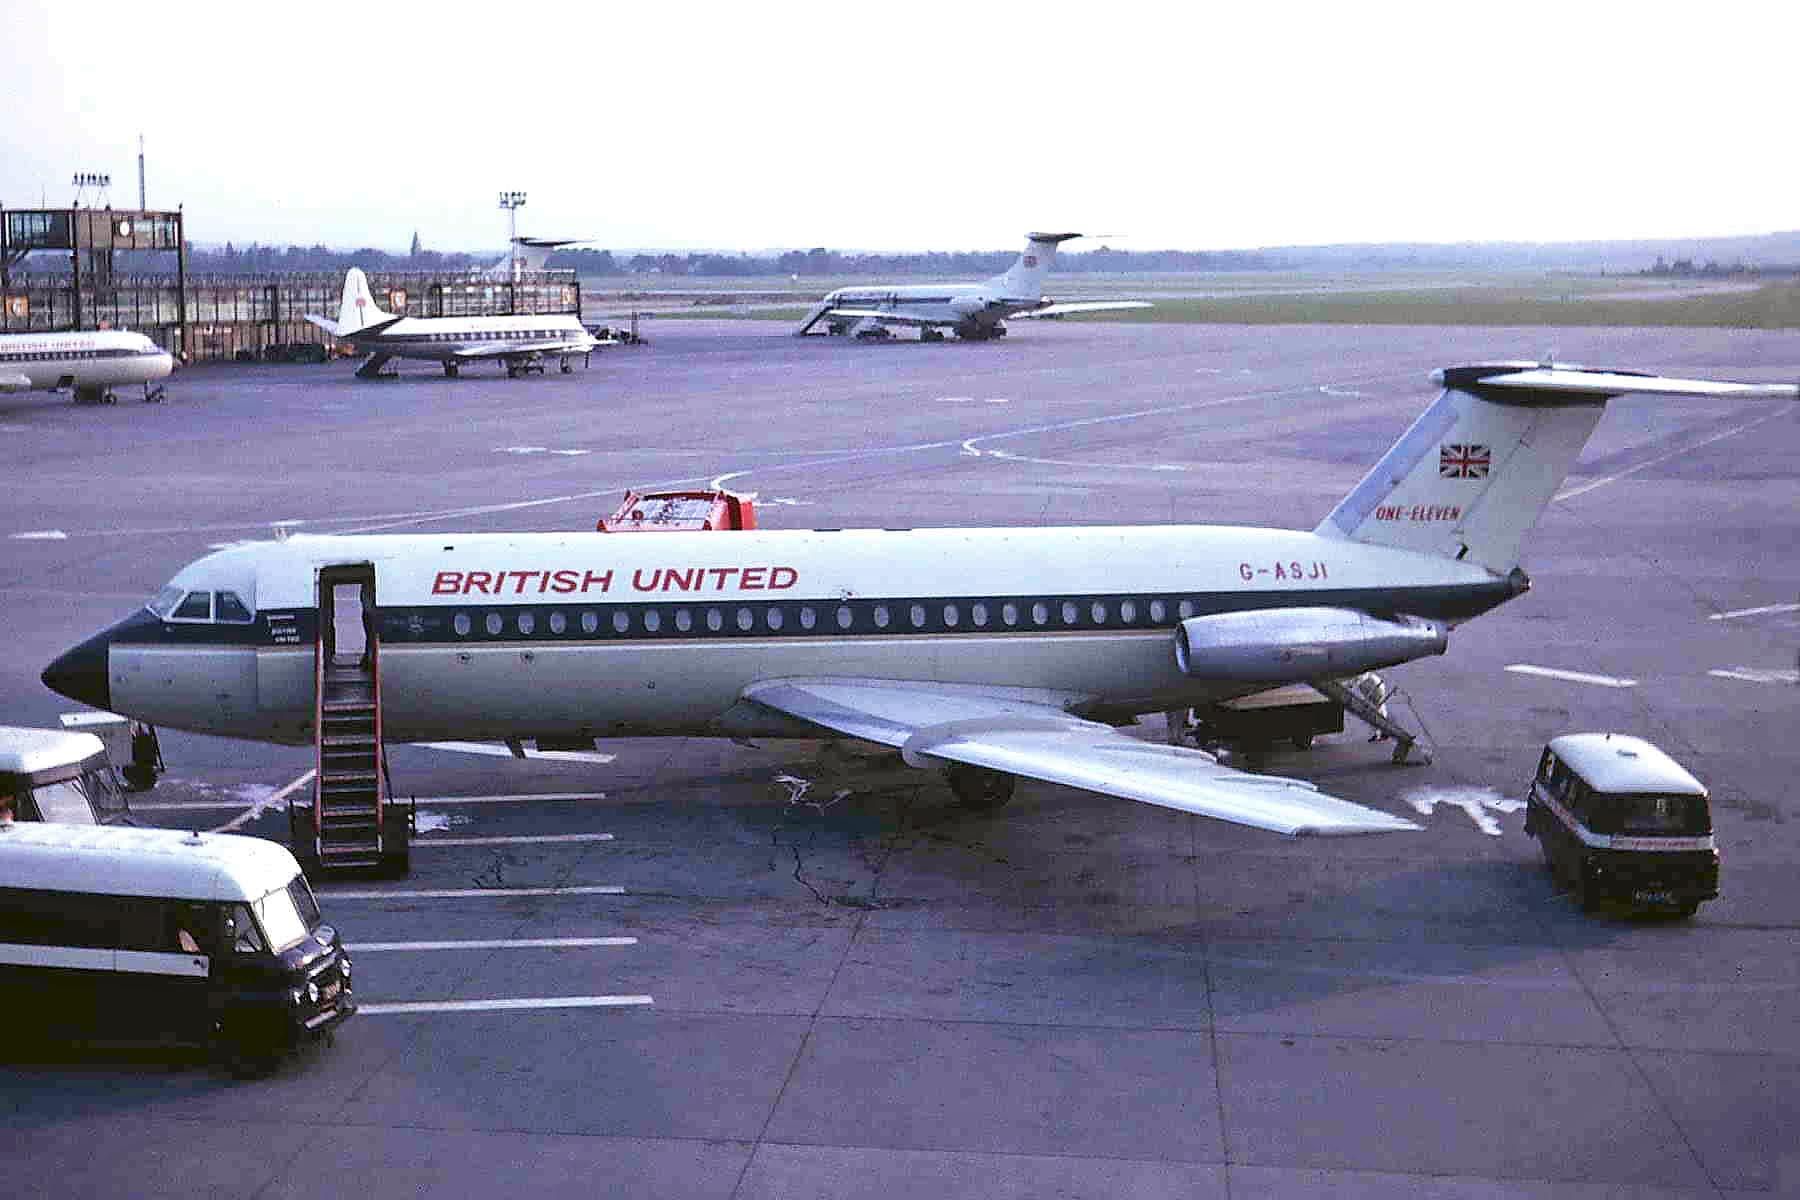 A British United BAC One-Eleven on an airport apron.